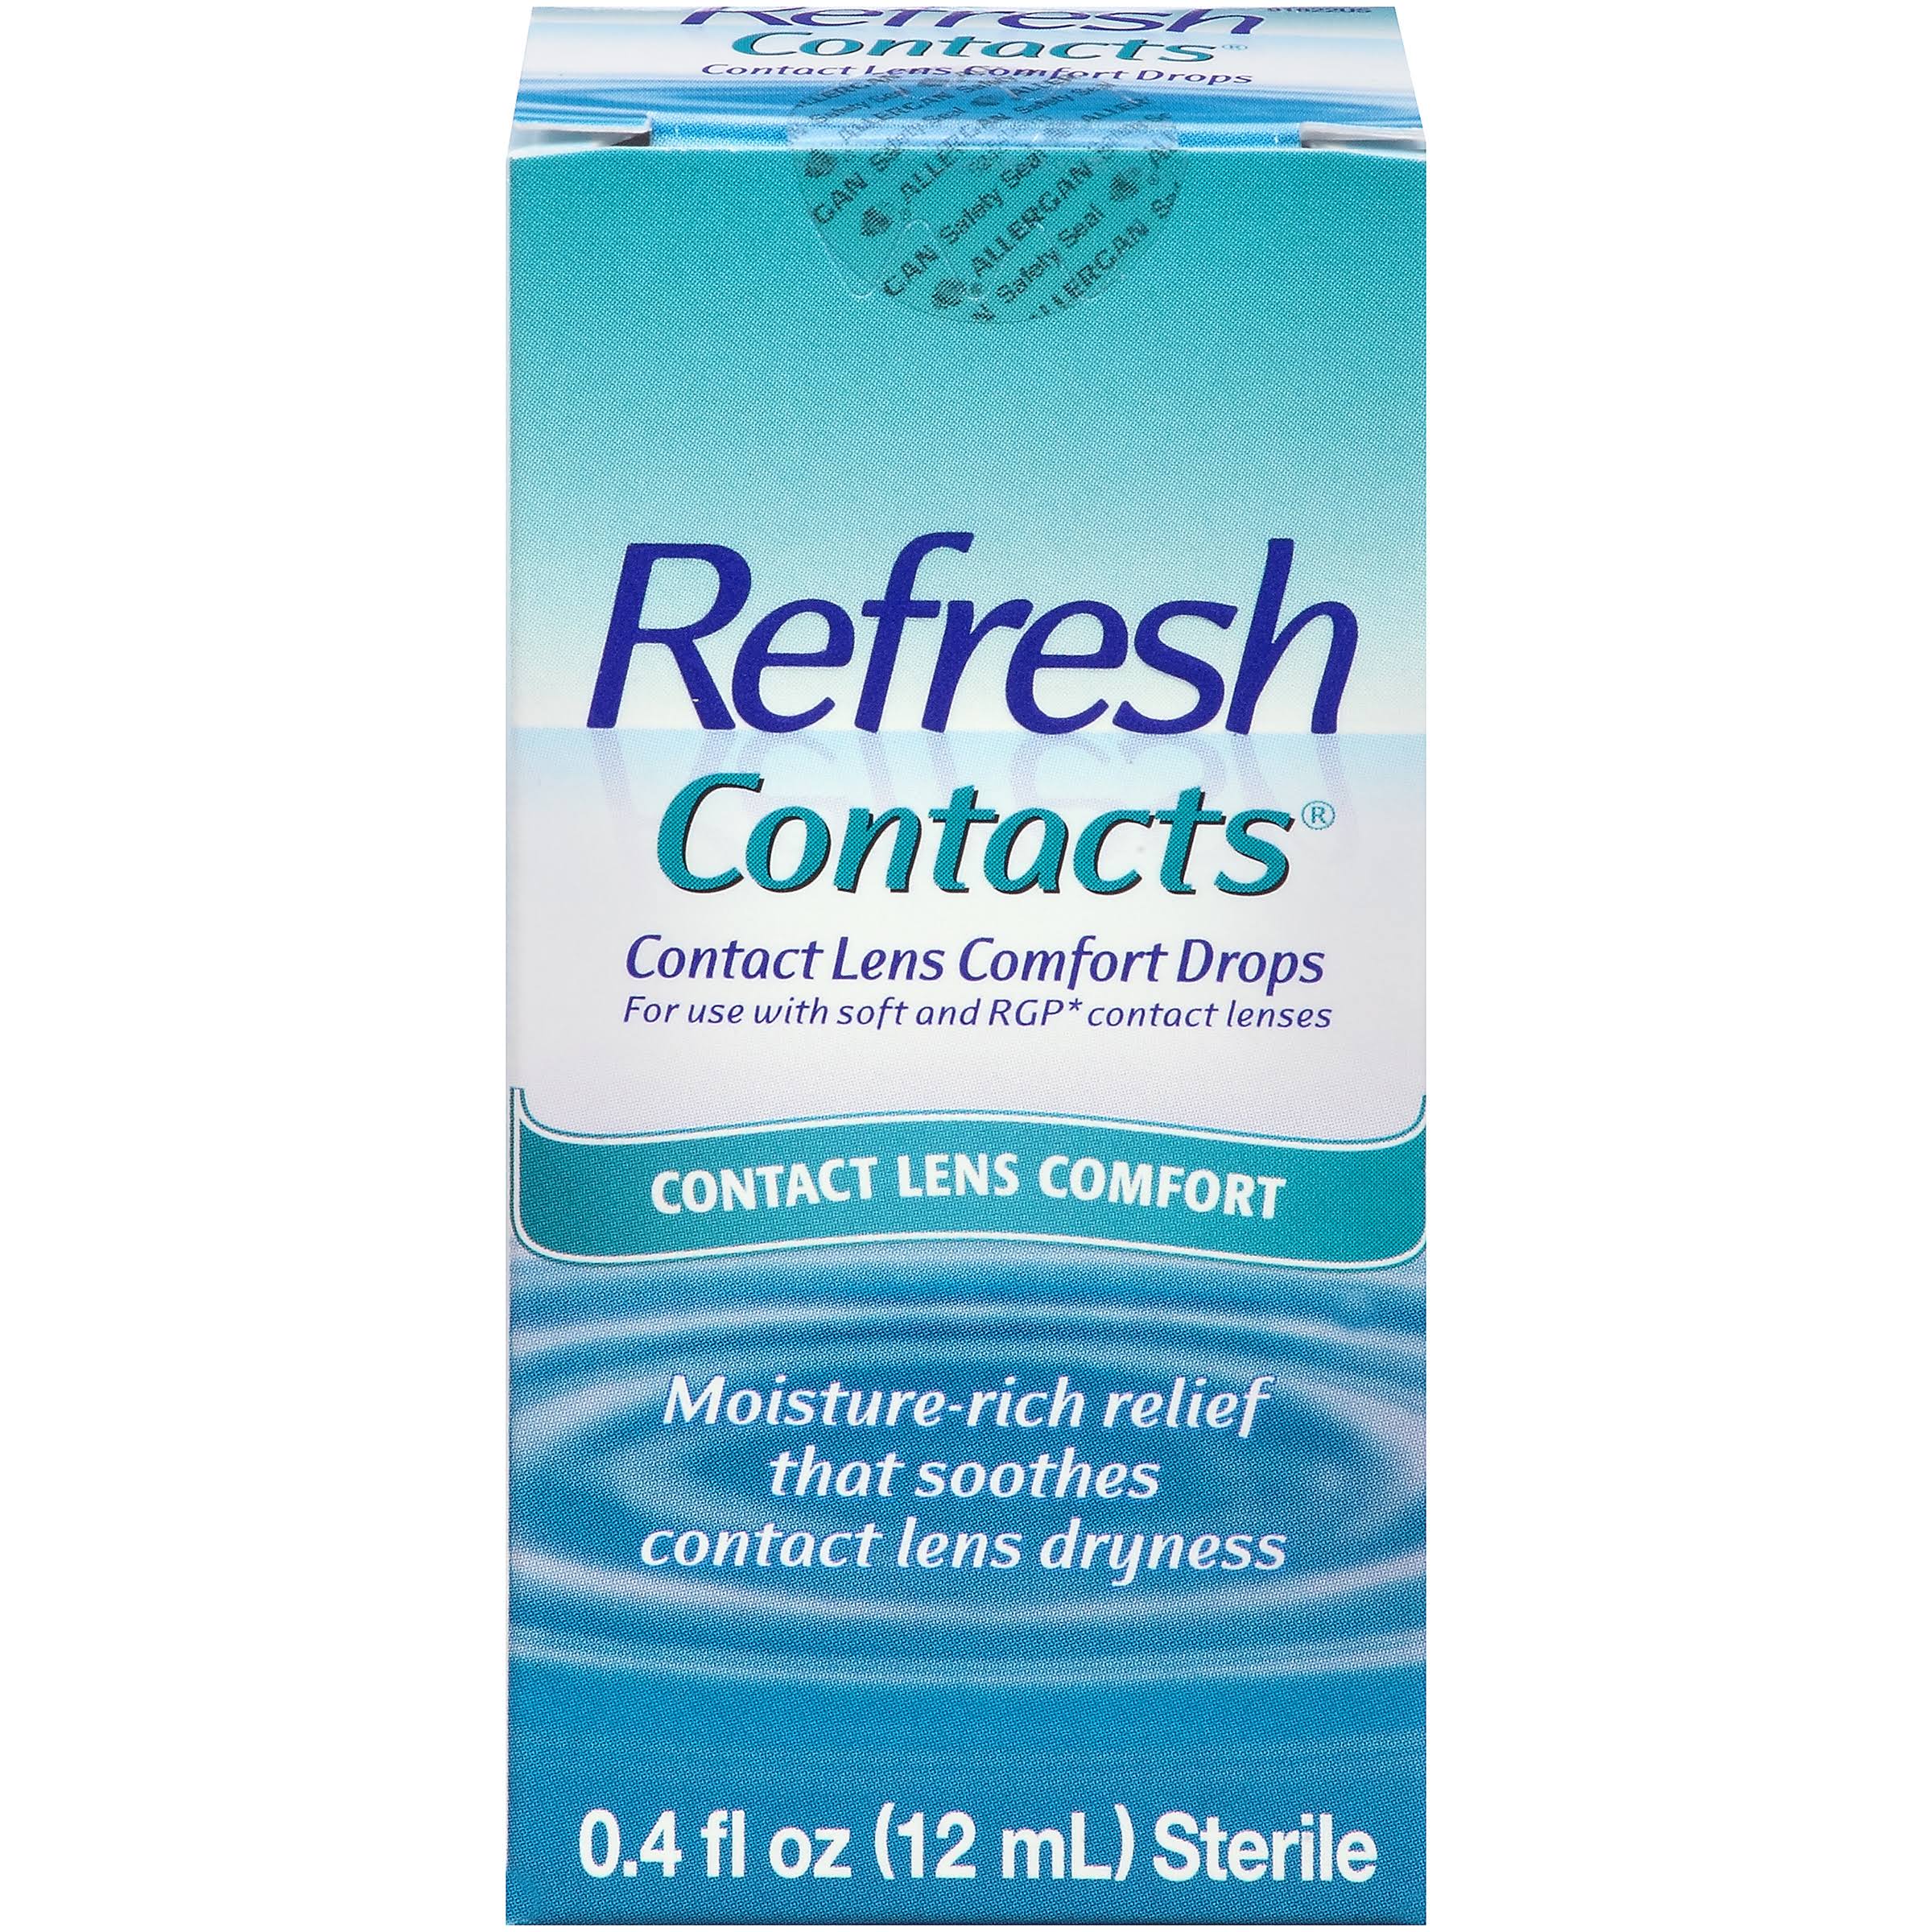 Refresh Contacts Sterile Contact Lens Comfort Drops - 0.4 oz